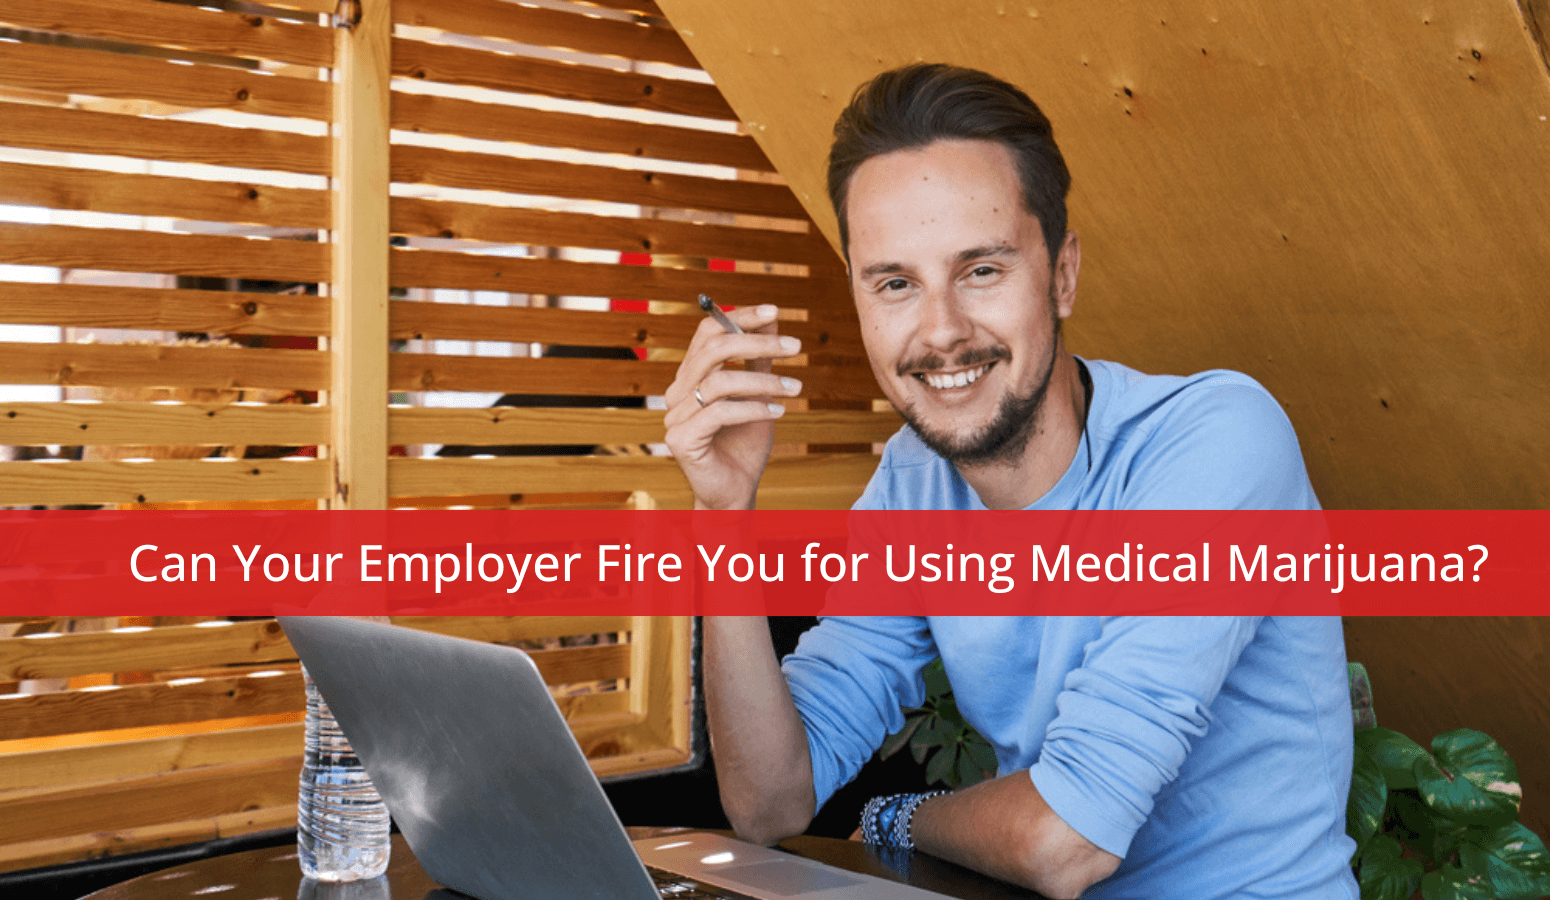 Featured image for “Can Your Employer Fire You for Using Medical Marijuana?”